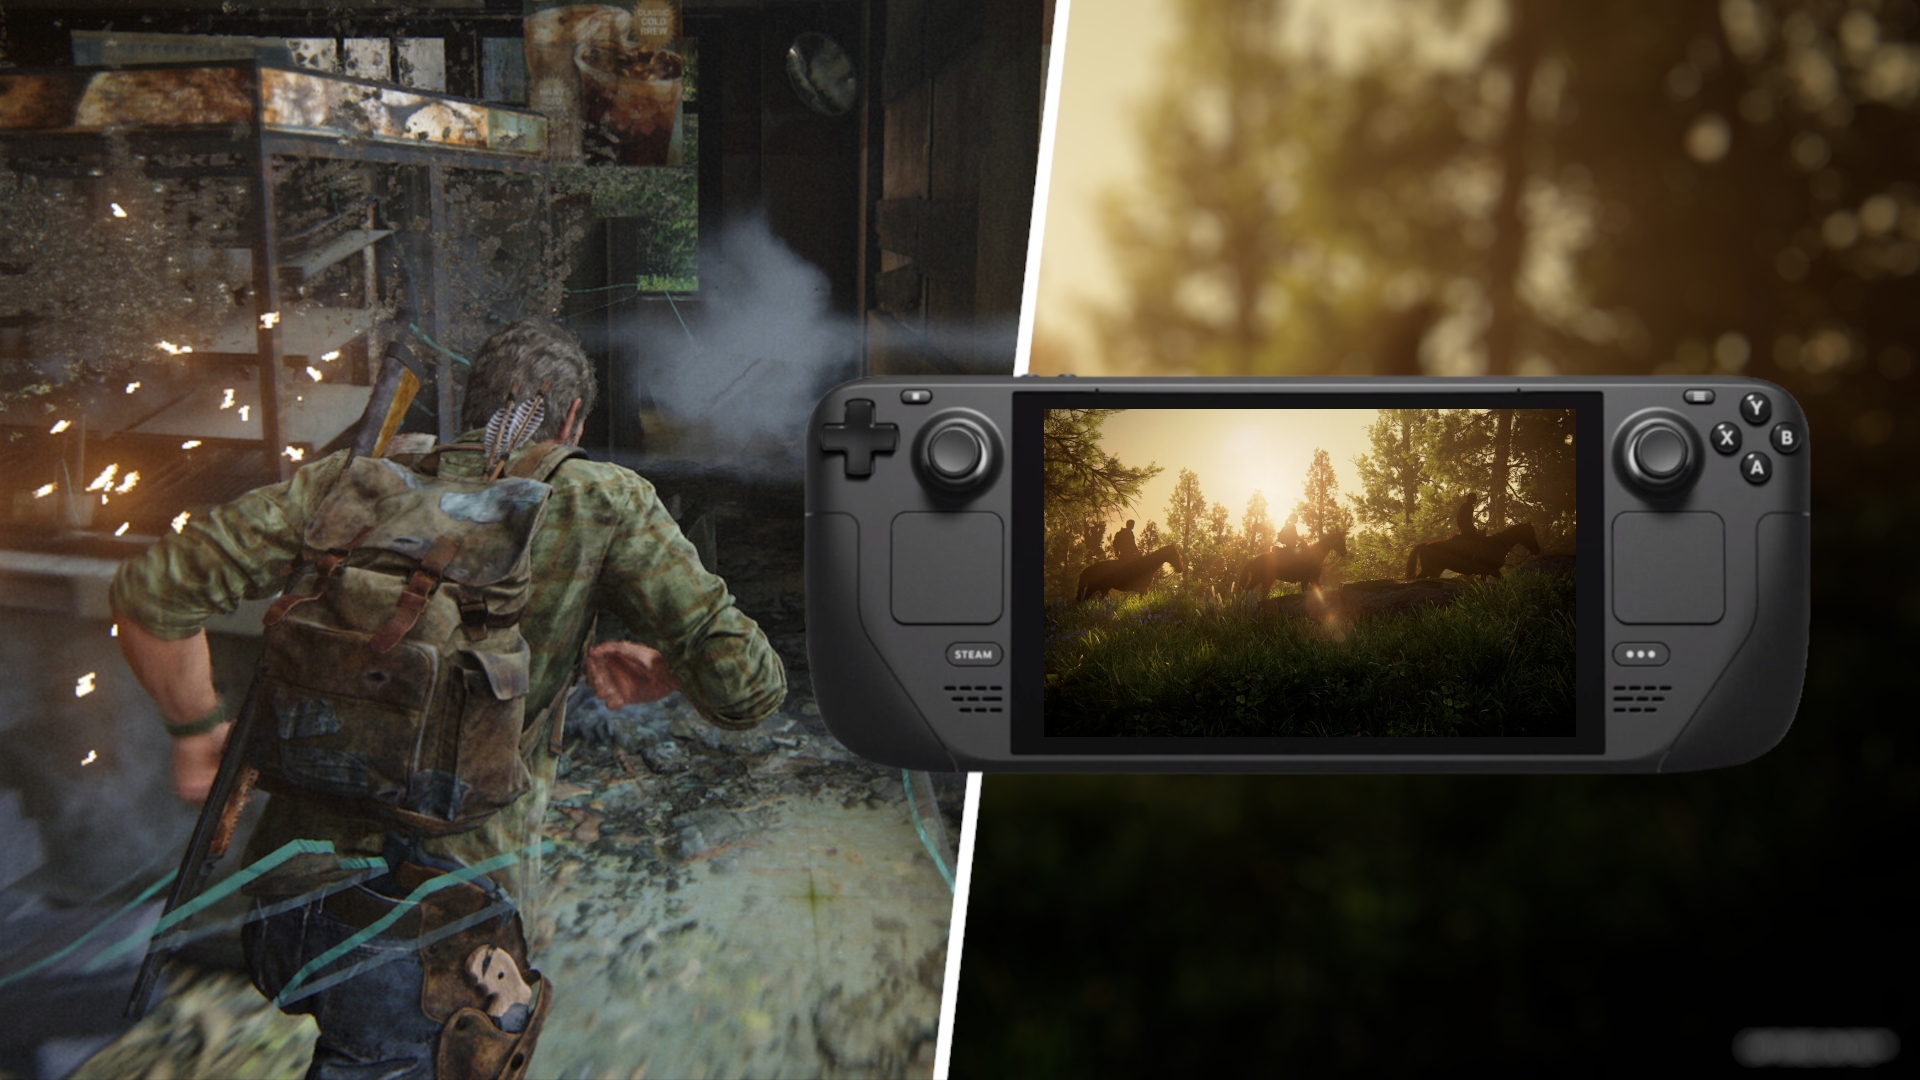 Don't worry, The Last of Us Part 1 will be Steam Deck compatible